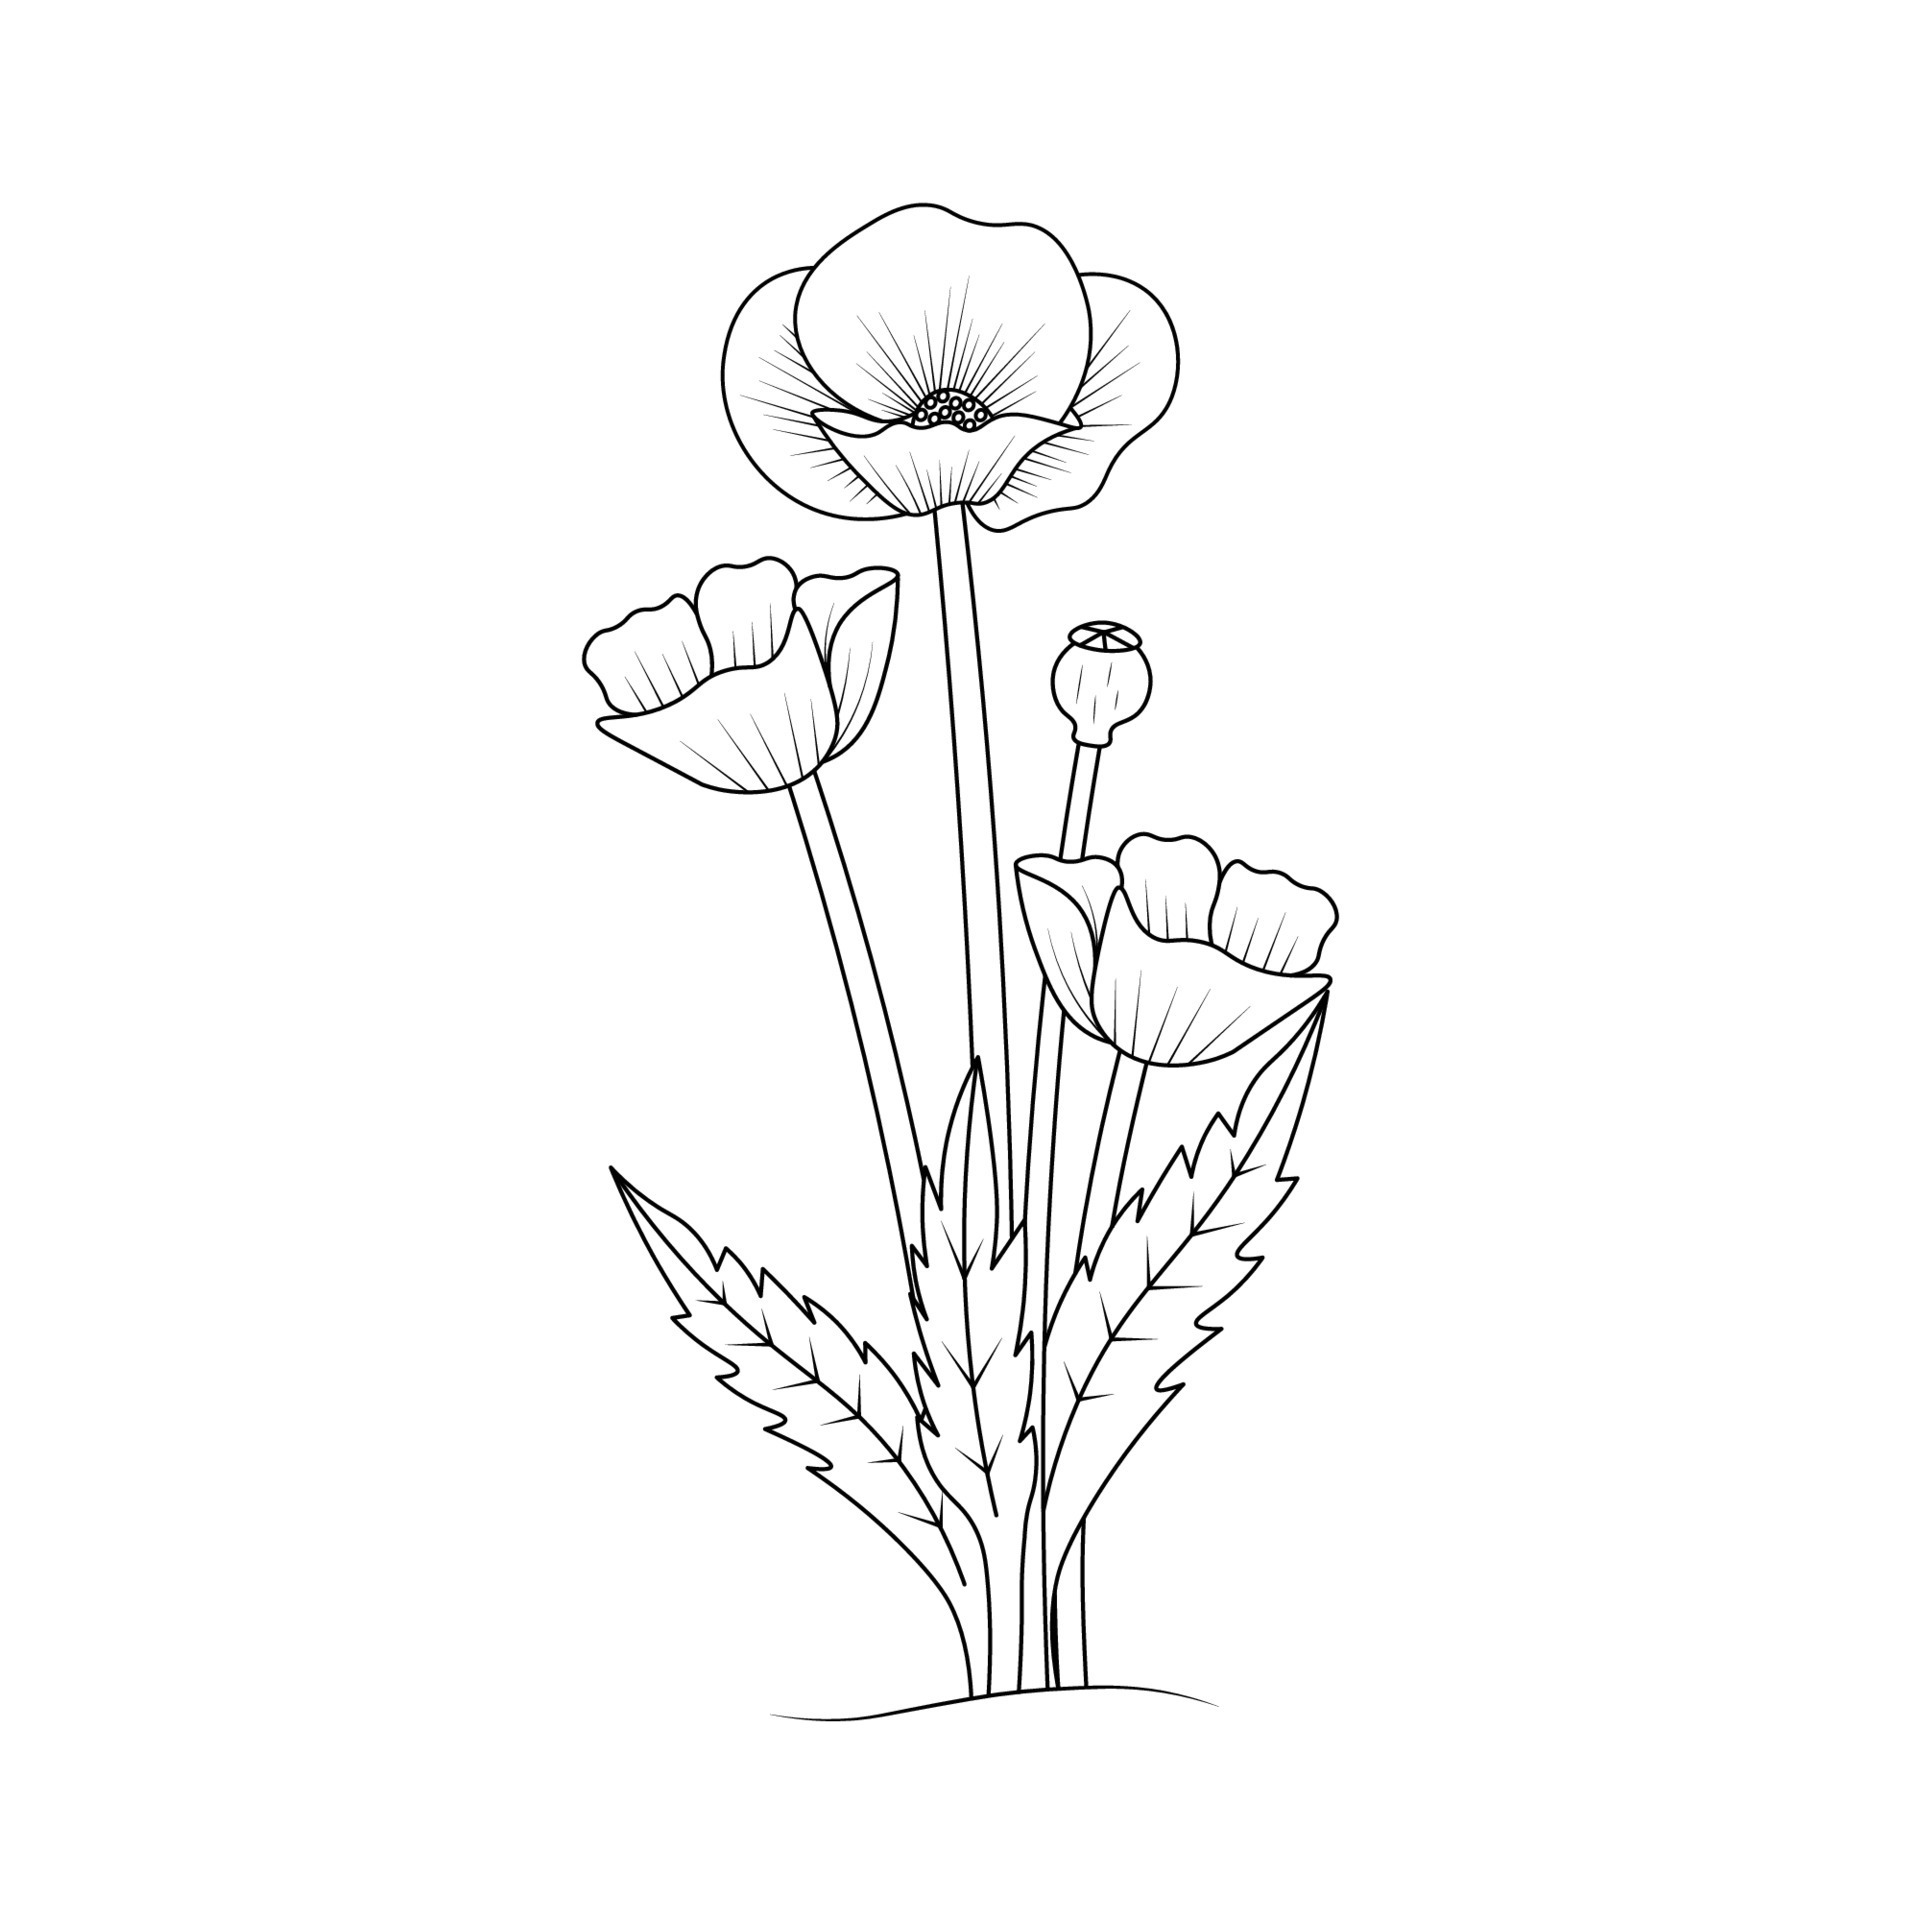 poppies flower line art design of coloring page flower with detailed ...